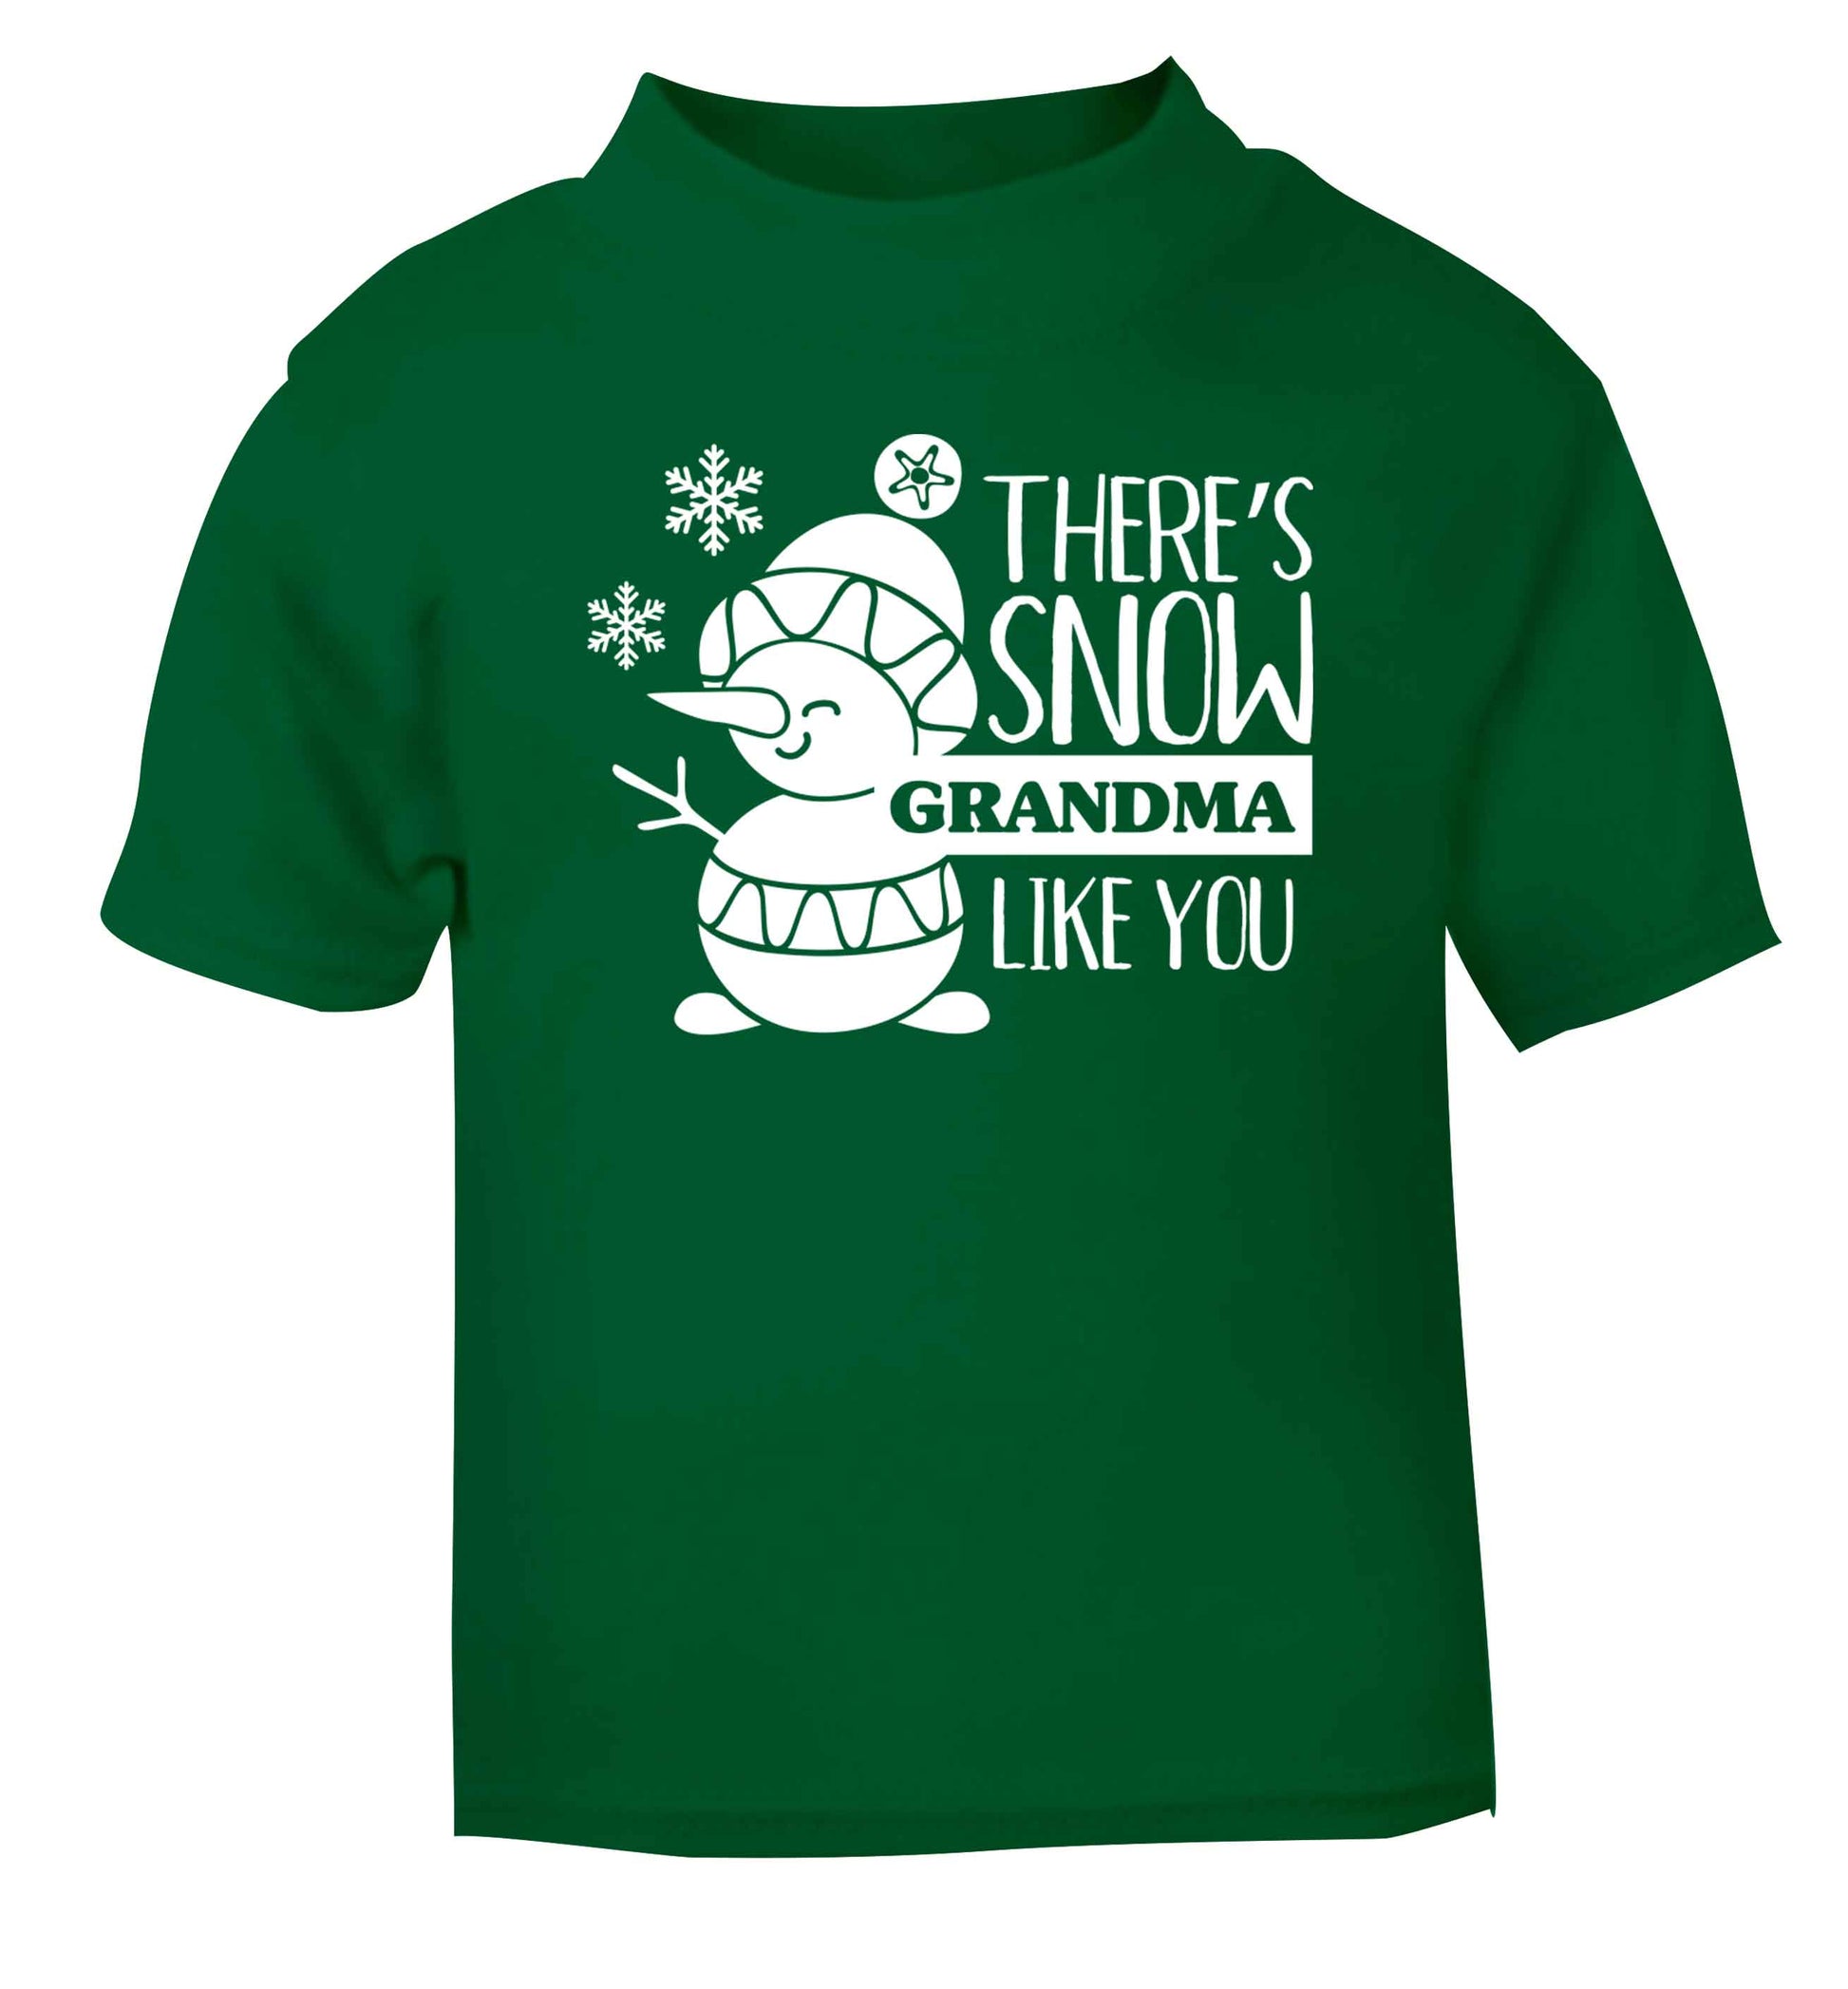 There's snow grandma like you green baby toddler Tshirt 2 Years